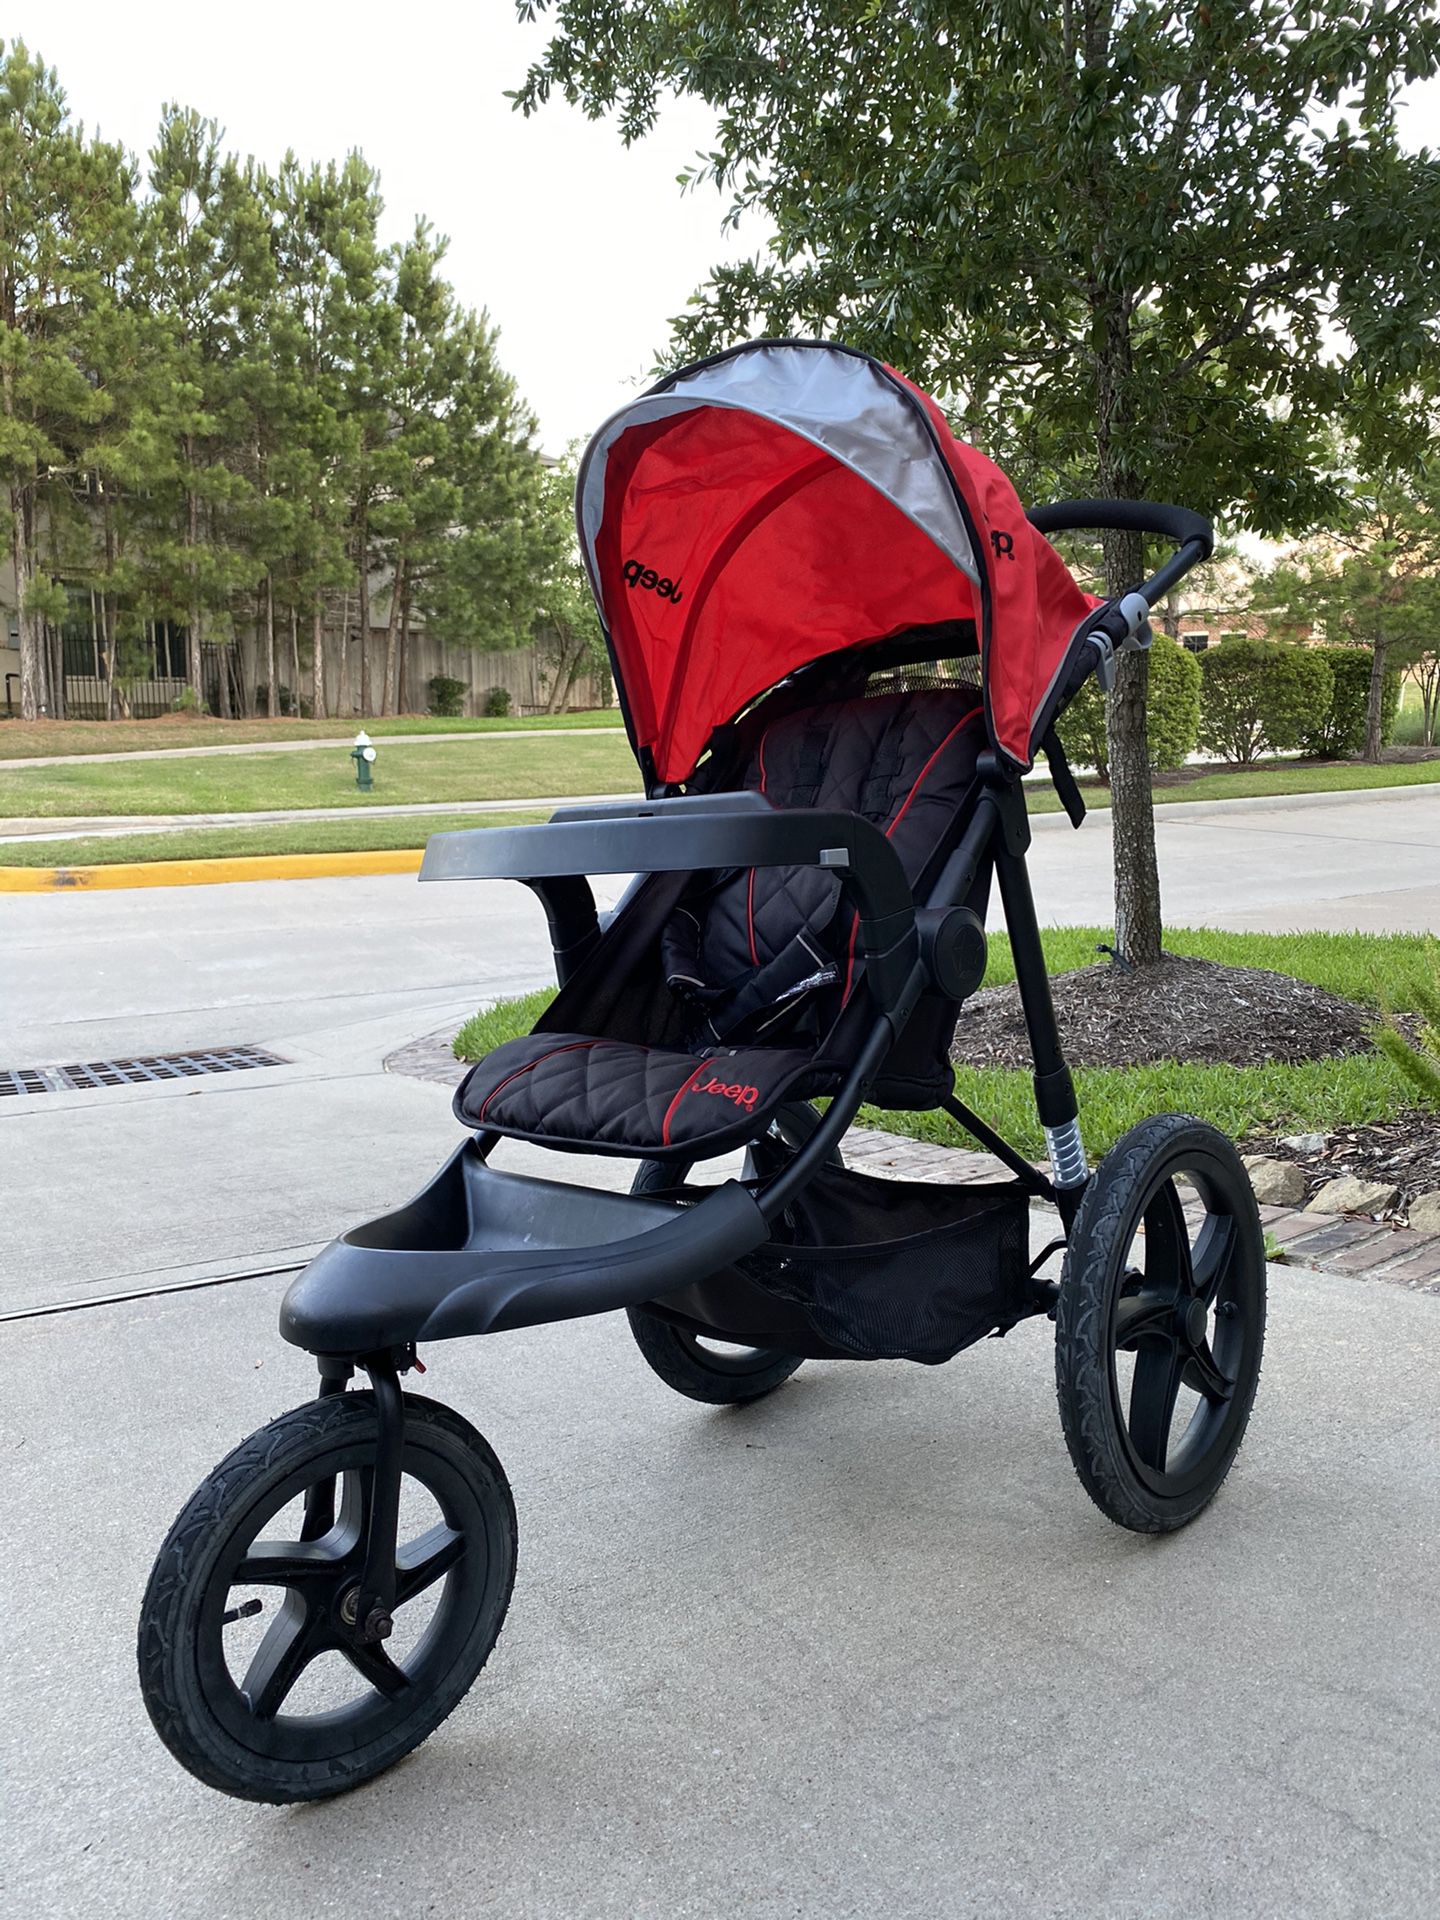 JEEP Jogger stroller, red